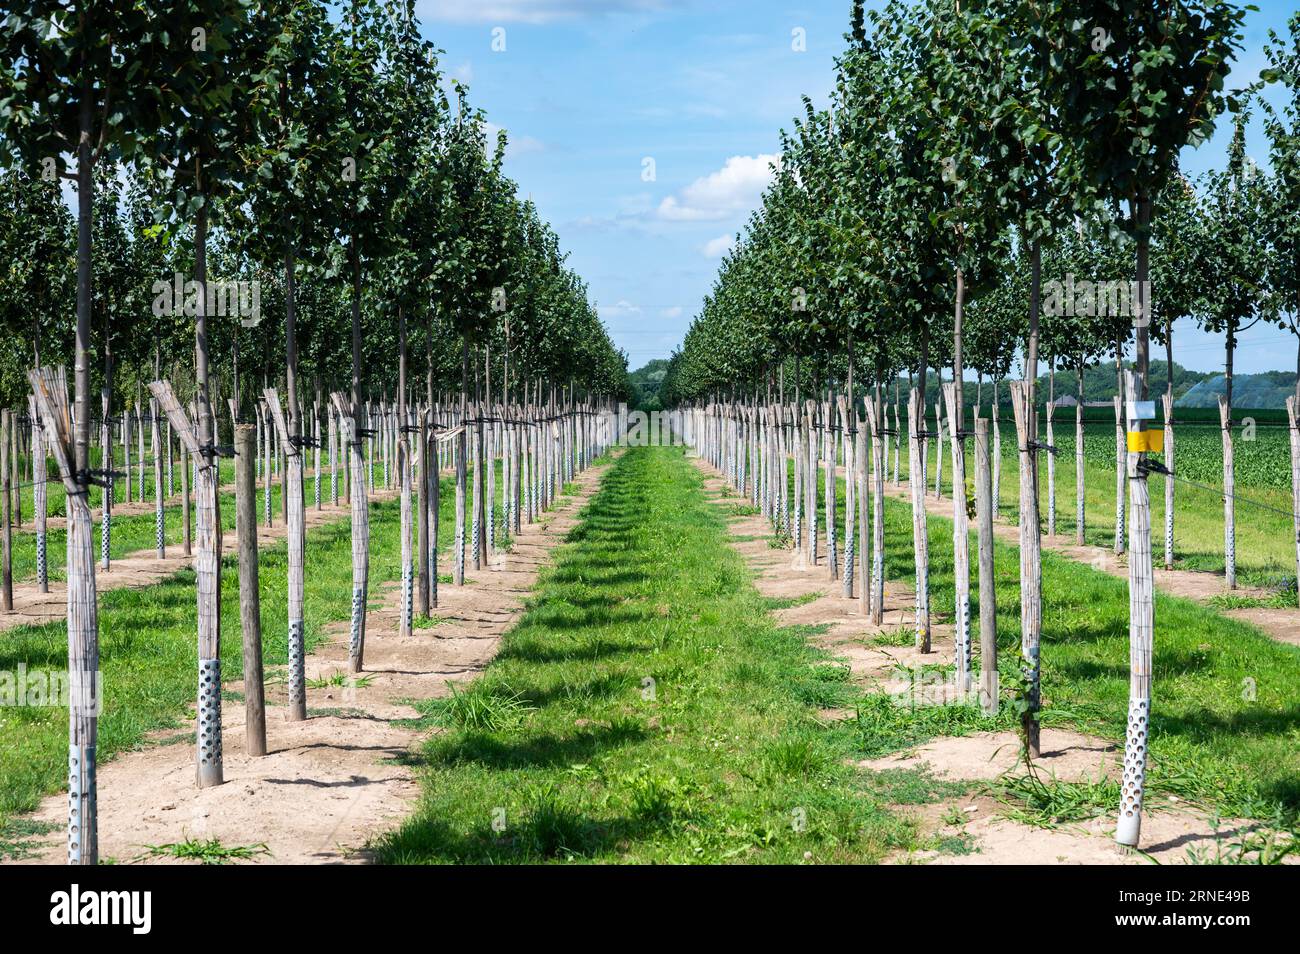 Cultivation of small trees in a row, Viersen, North Rhine Westphalia, Germany Stock Photo